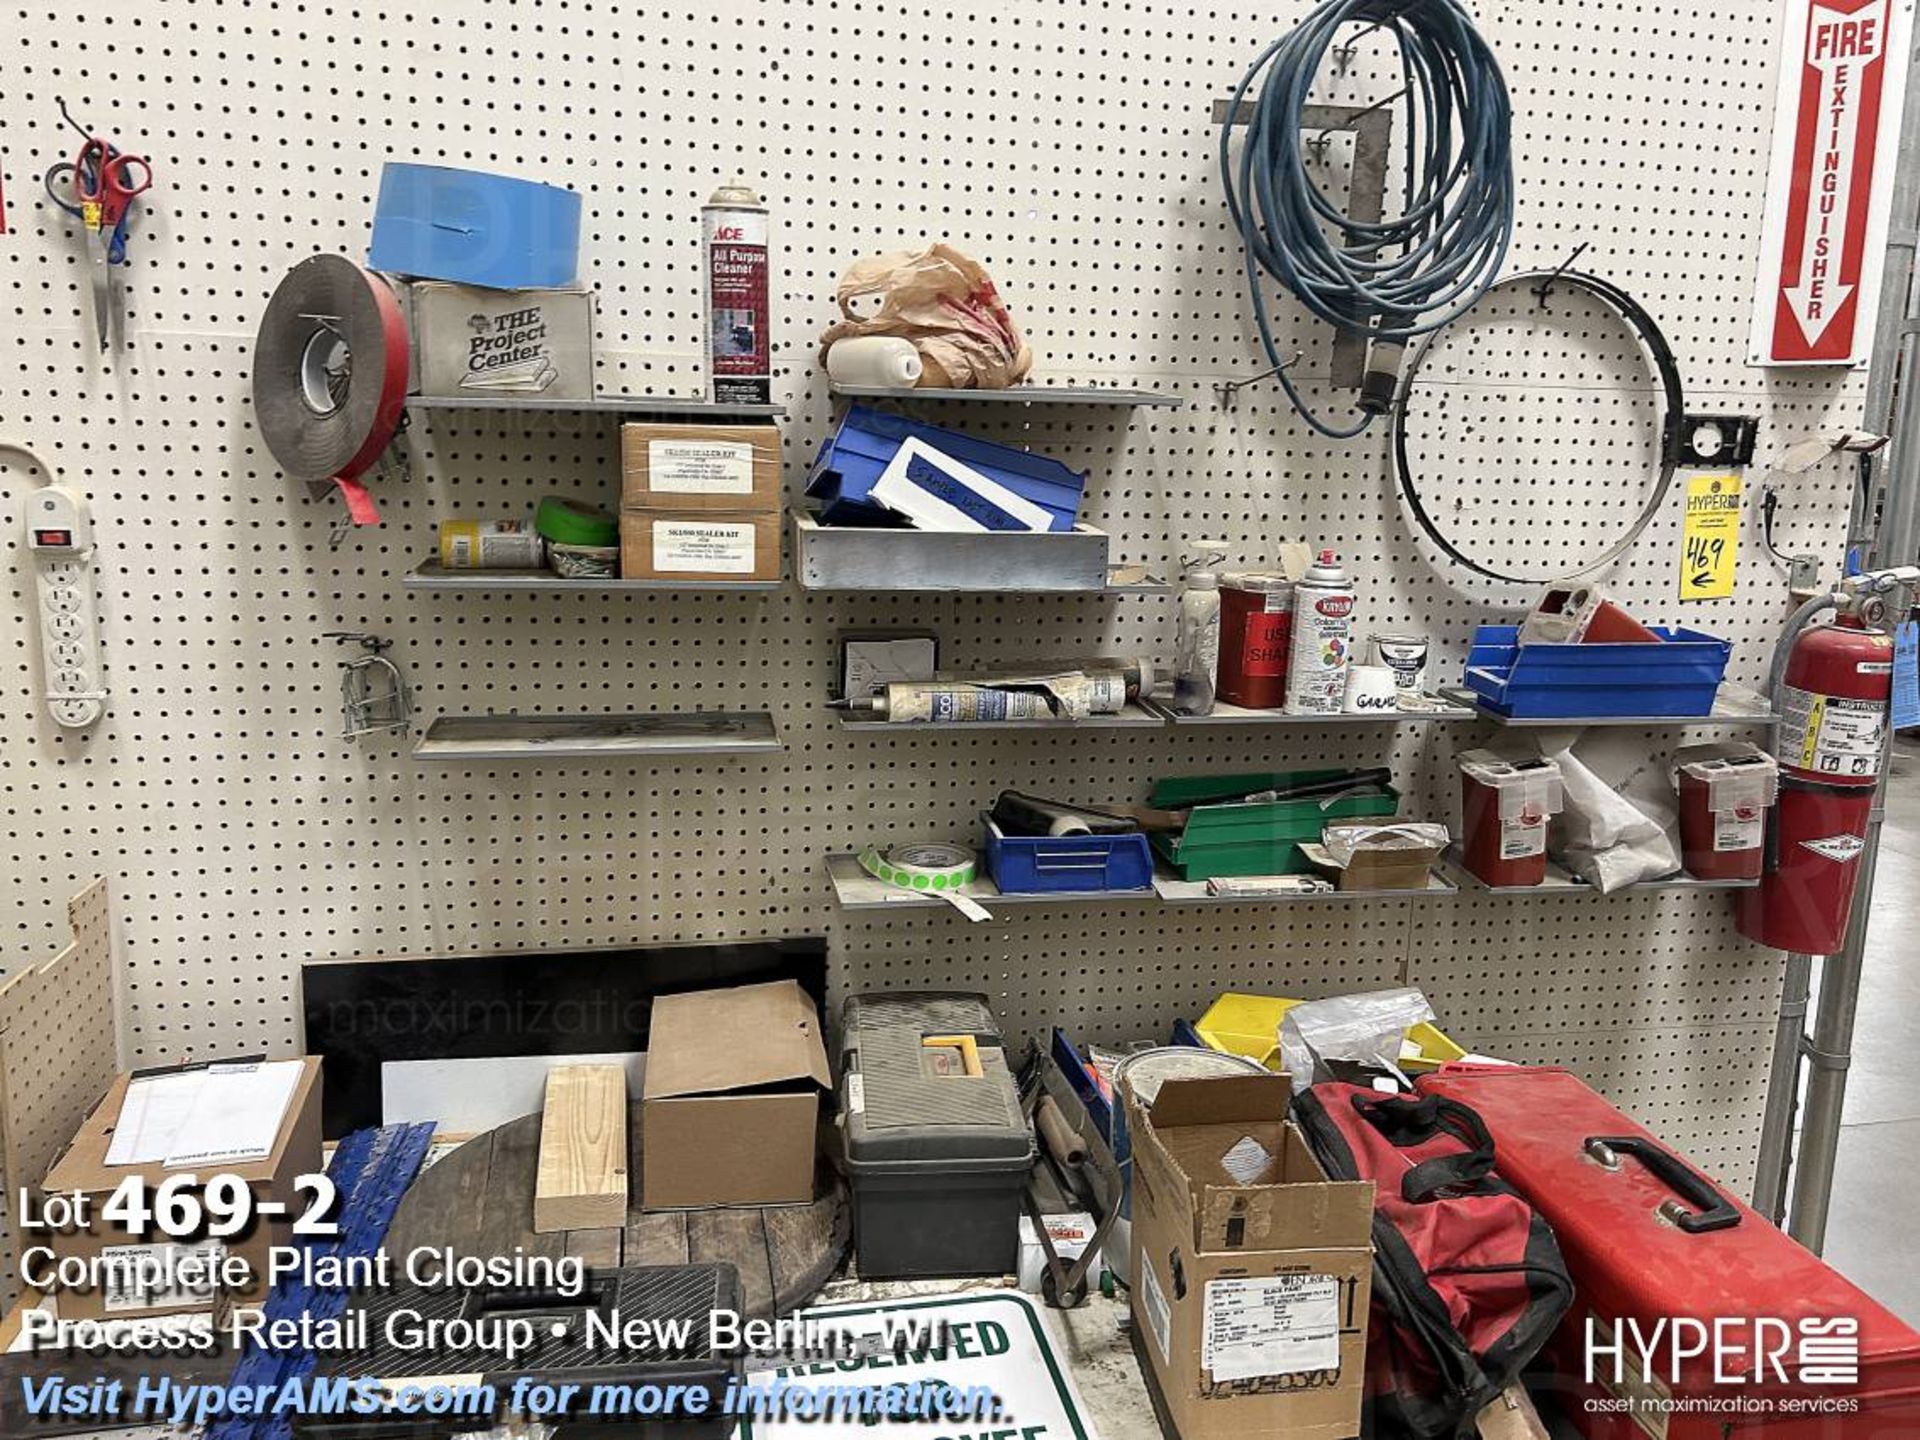 Table, signs, tool boxes, extension cords, shelf - Image 2 of 4